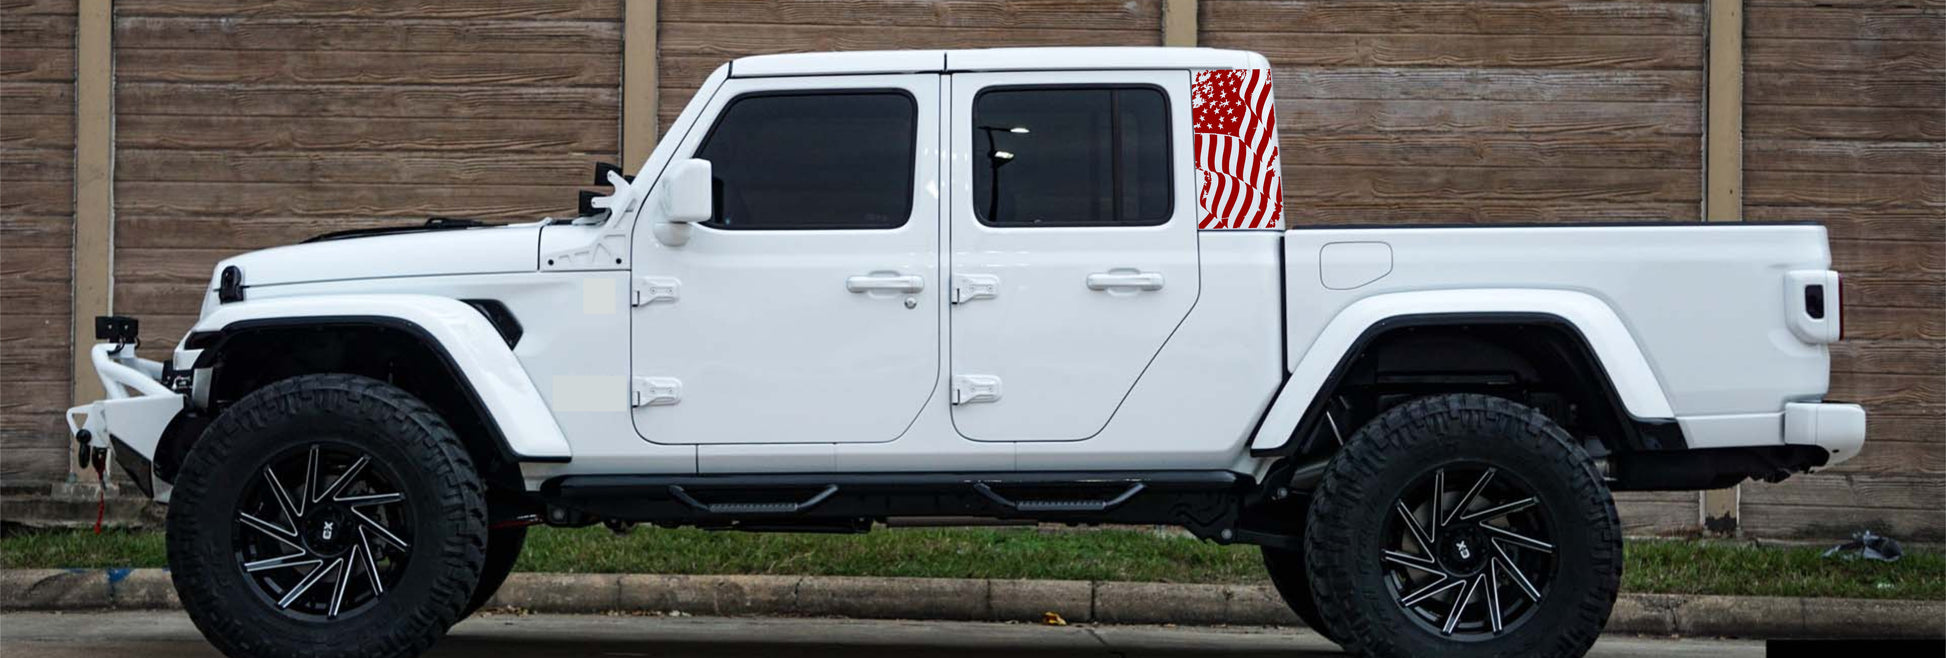 Distressed American Flag Decal For Jeep Gladiator